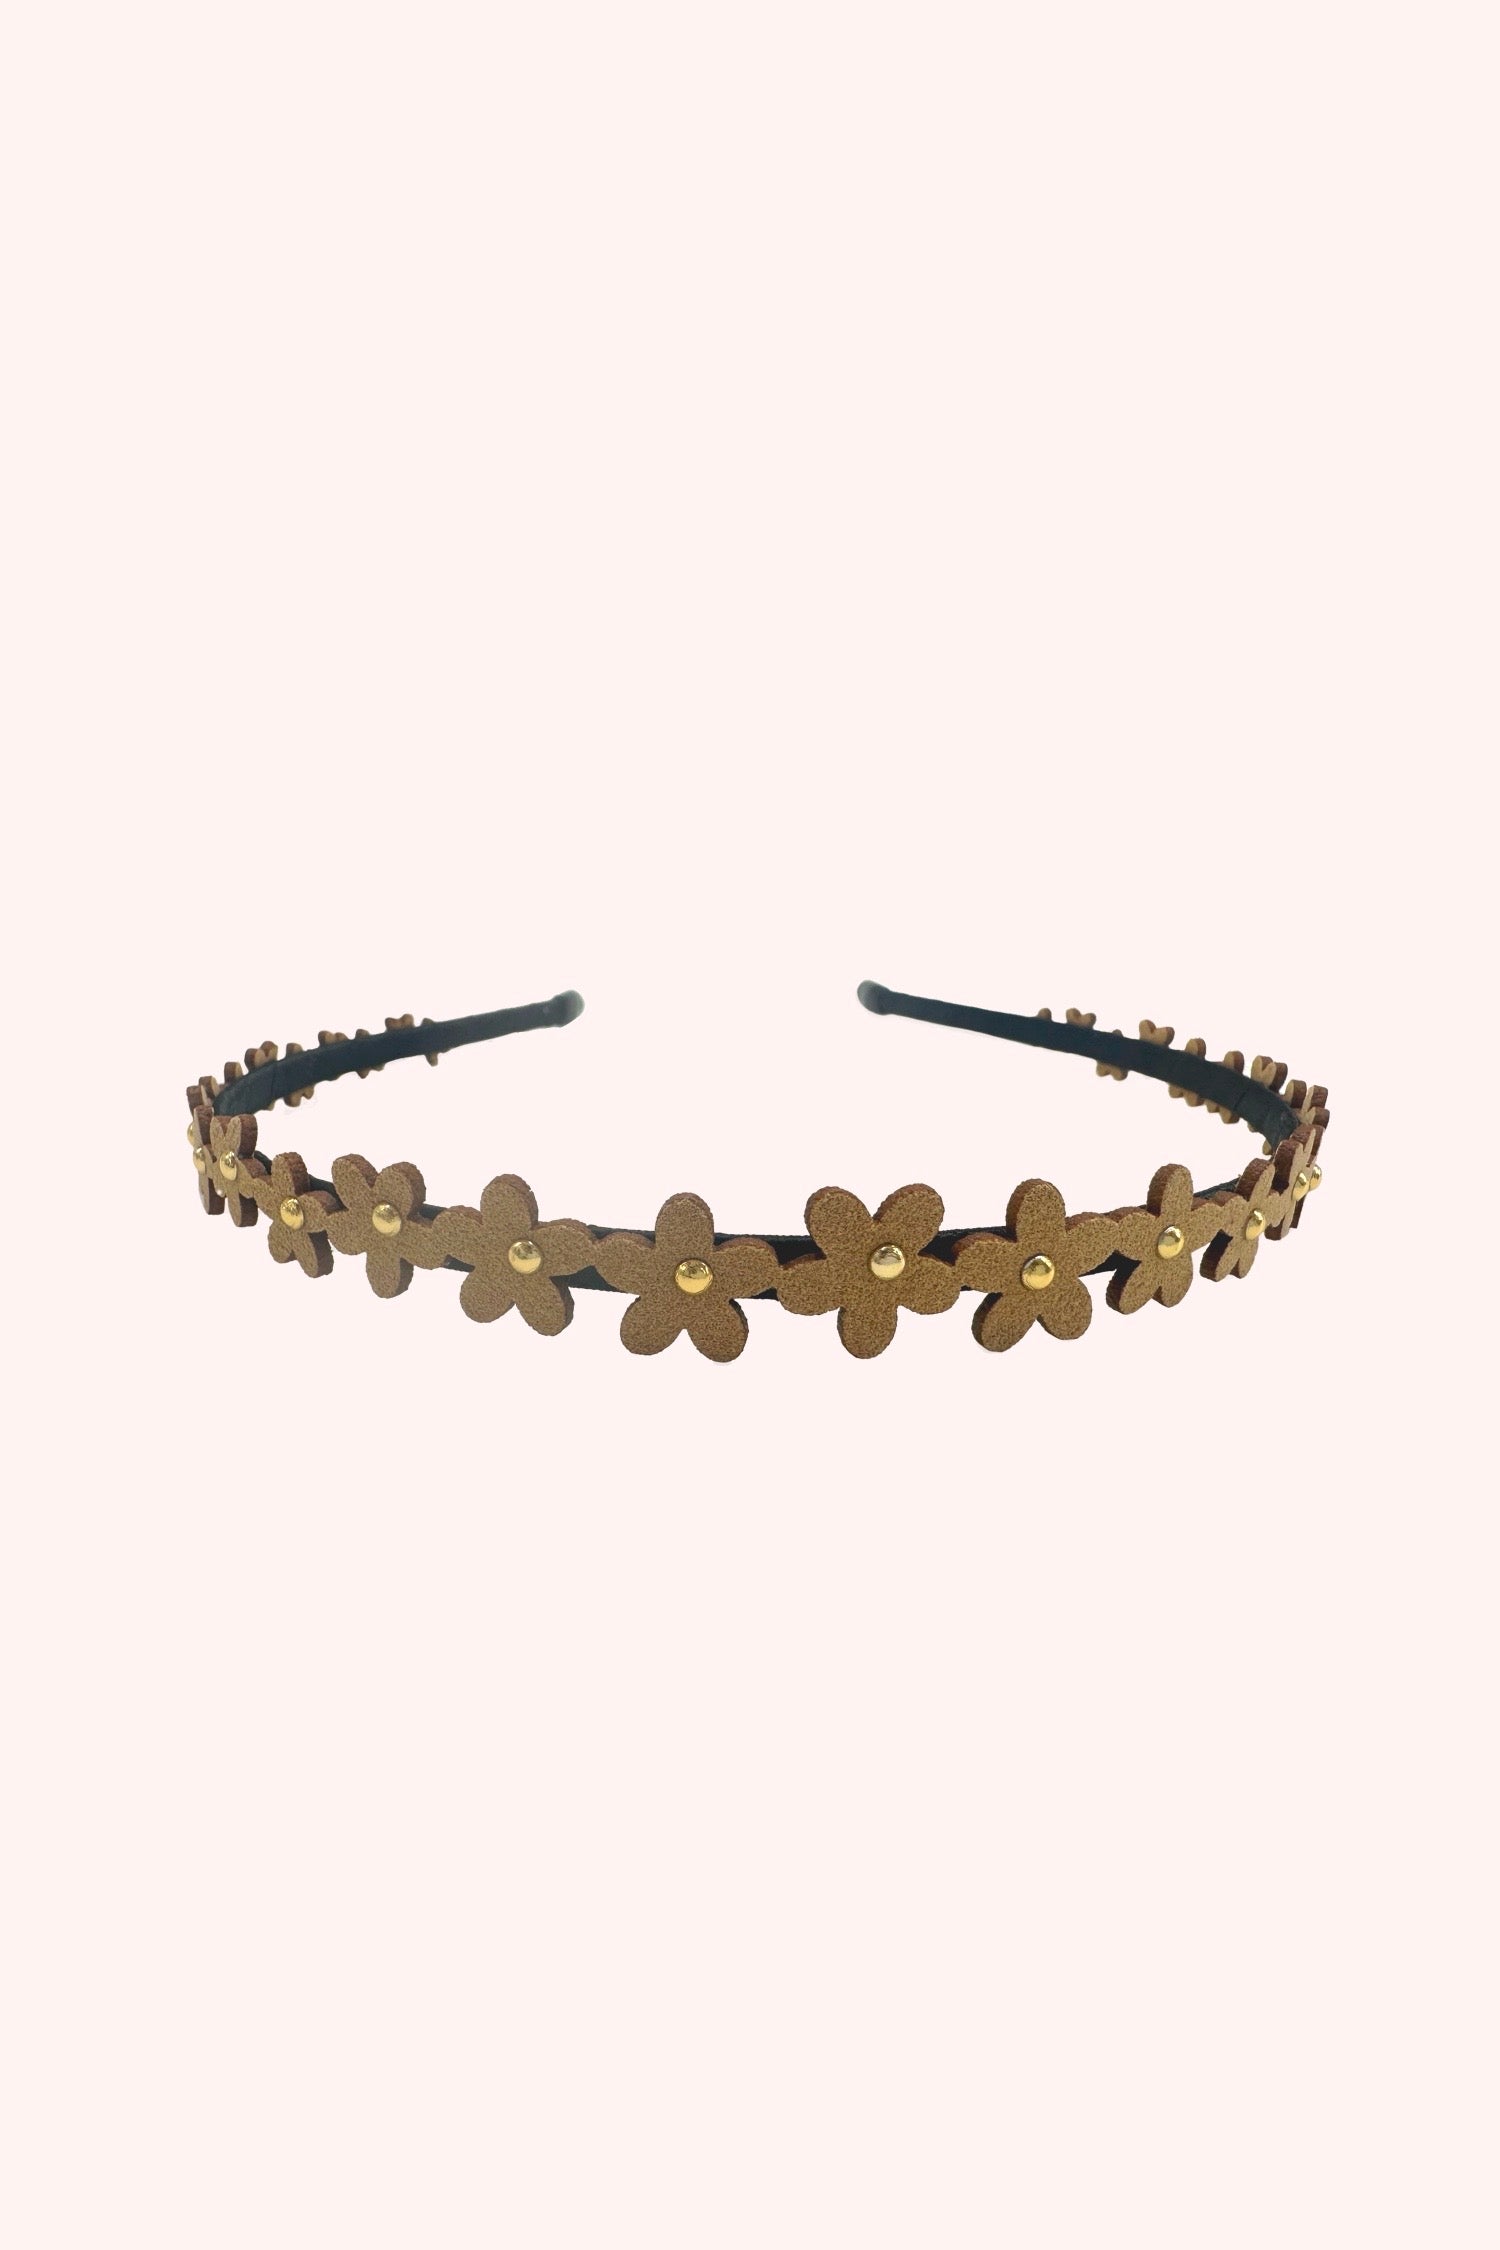 Forget Me Not Headband Nude, repetitive 5-petals with golden center flower